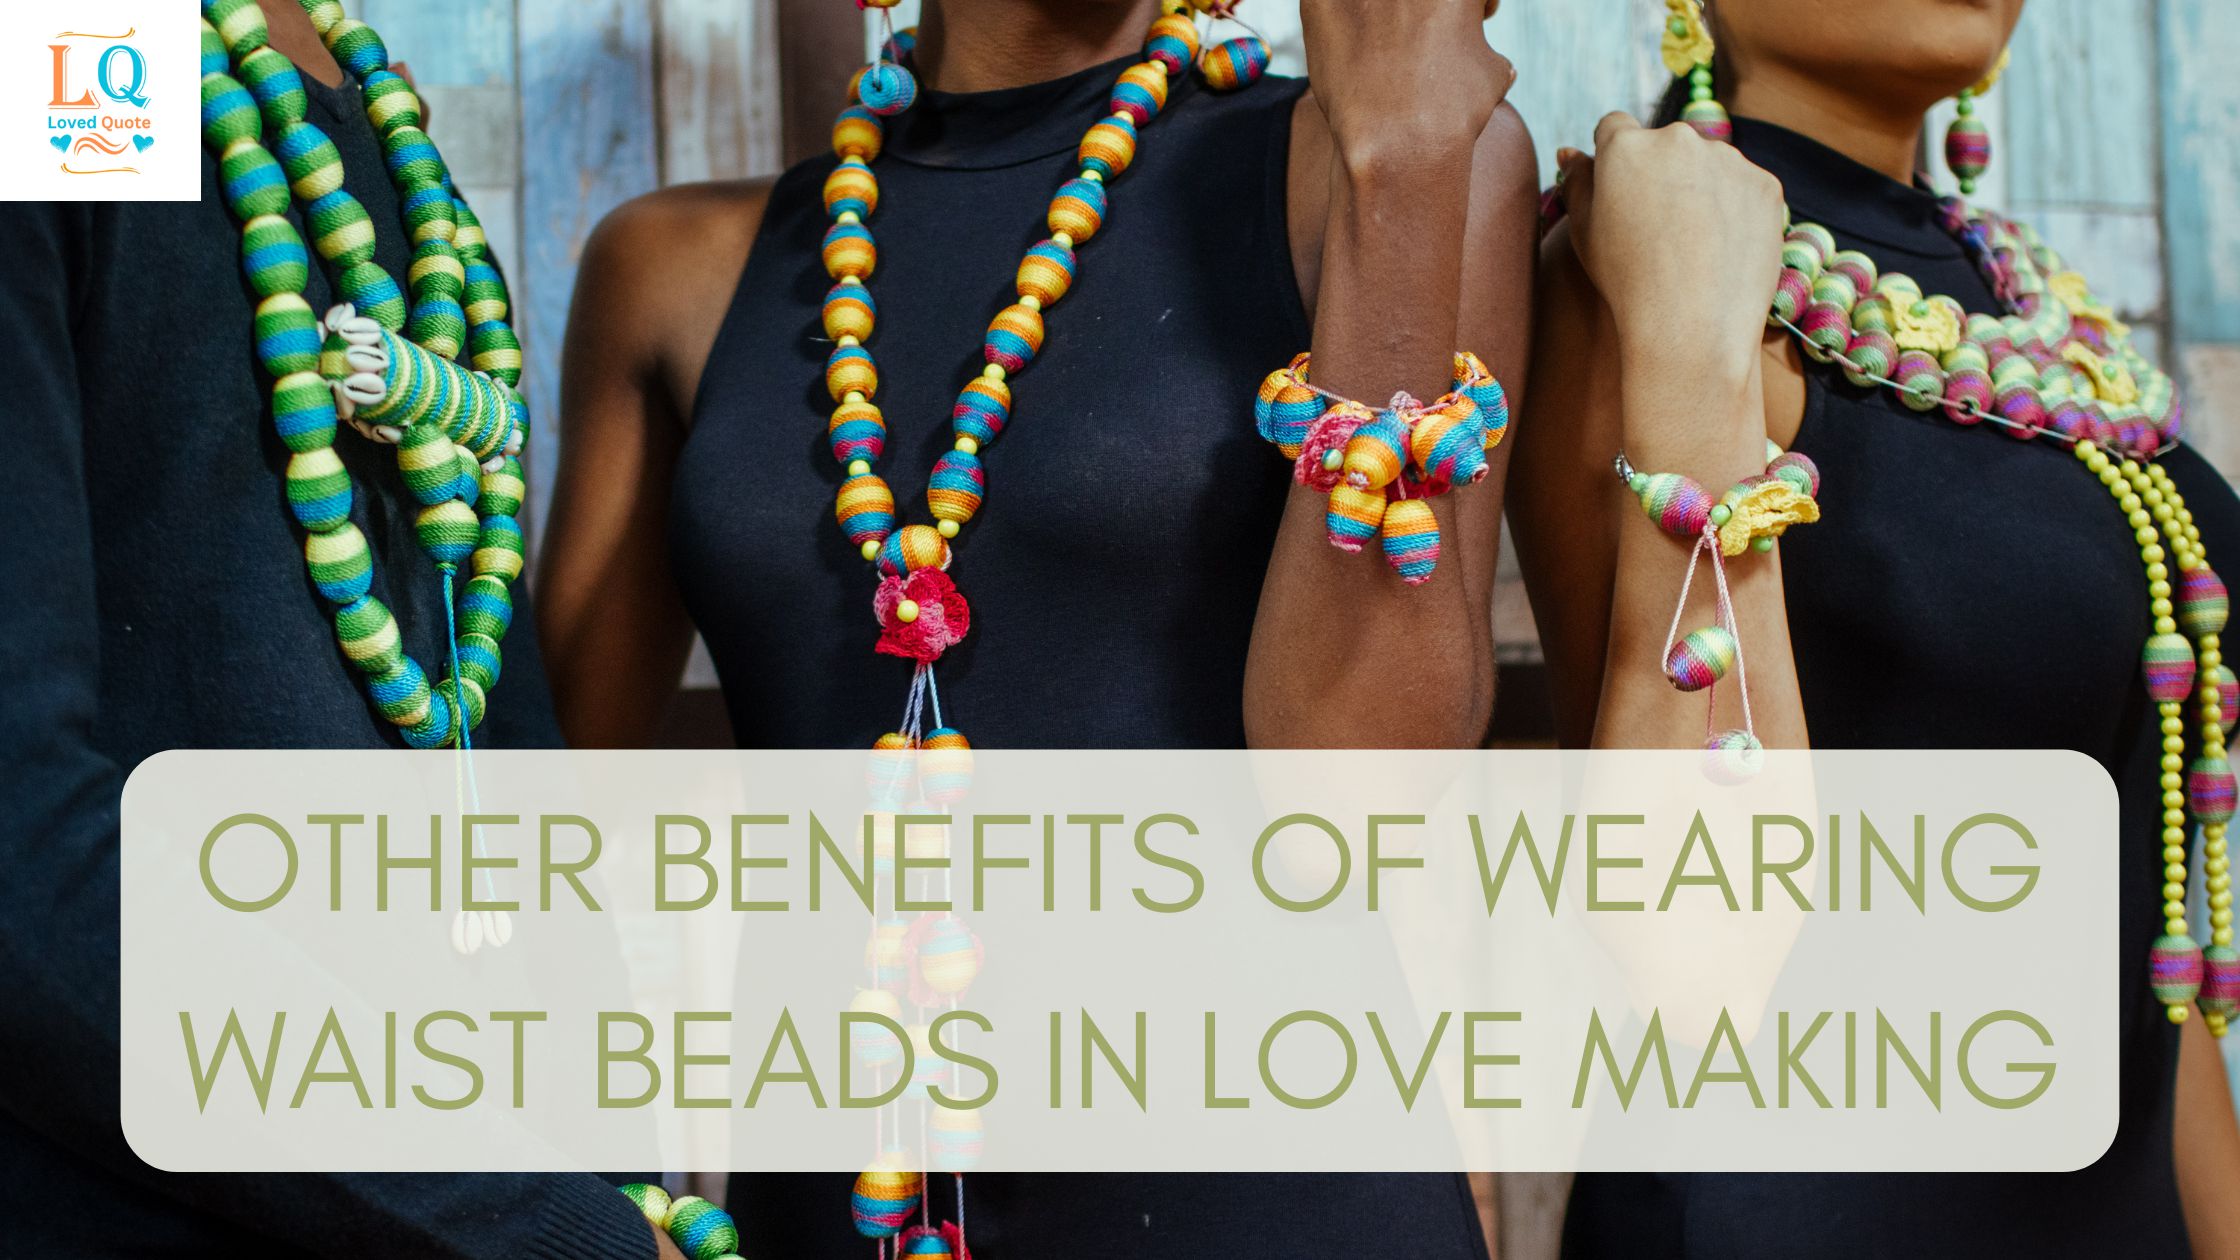 Other Benefits of Wearing Waist Beads in Love Making